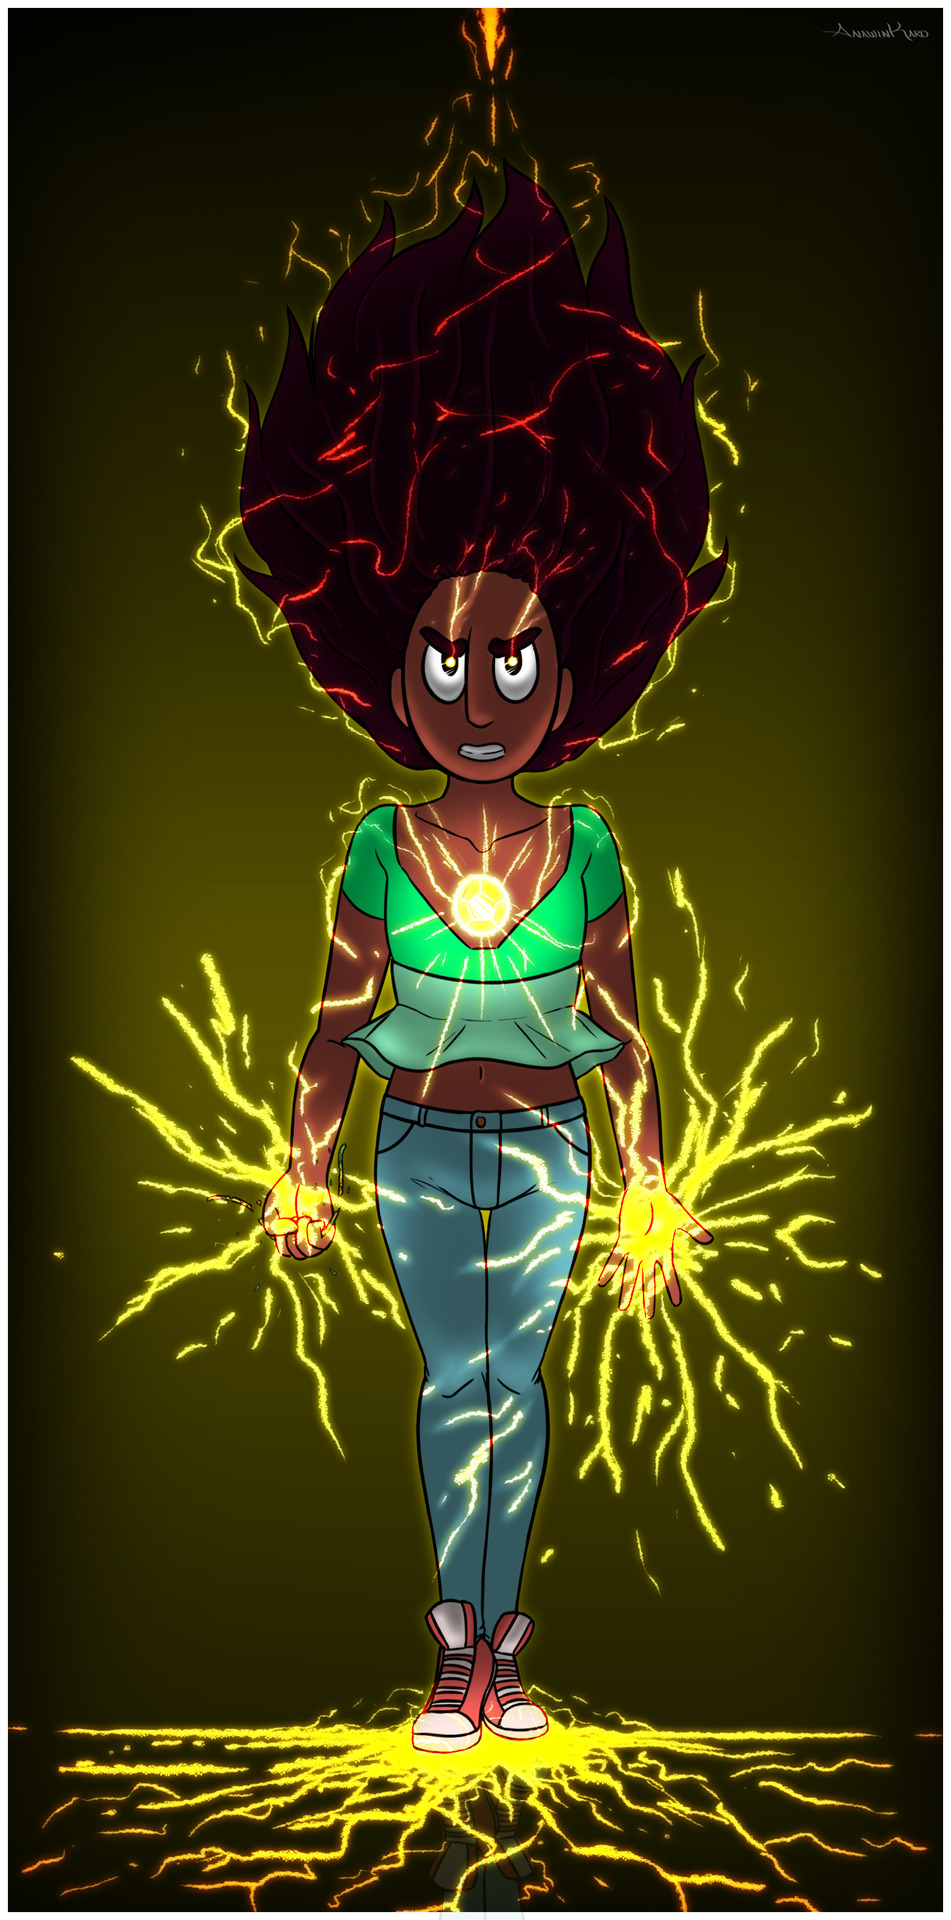 Electric Connie Another Connie Swap AU drawing. I love her so much! @connieswap